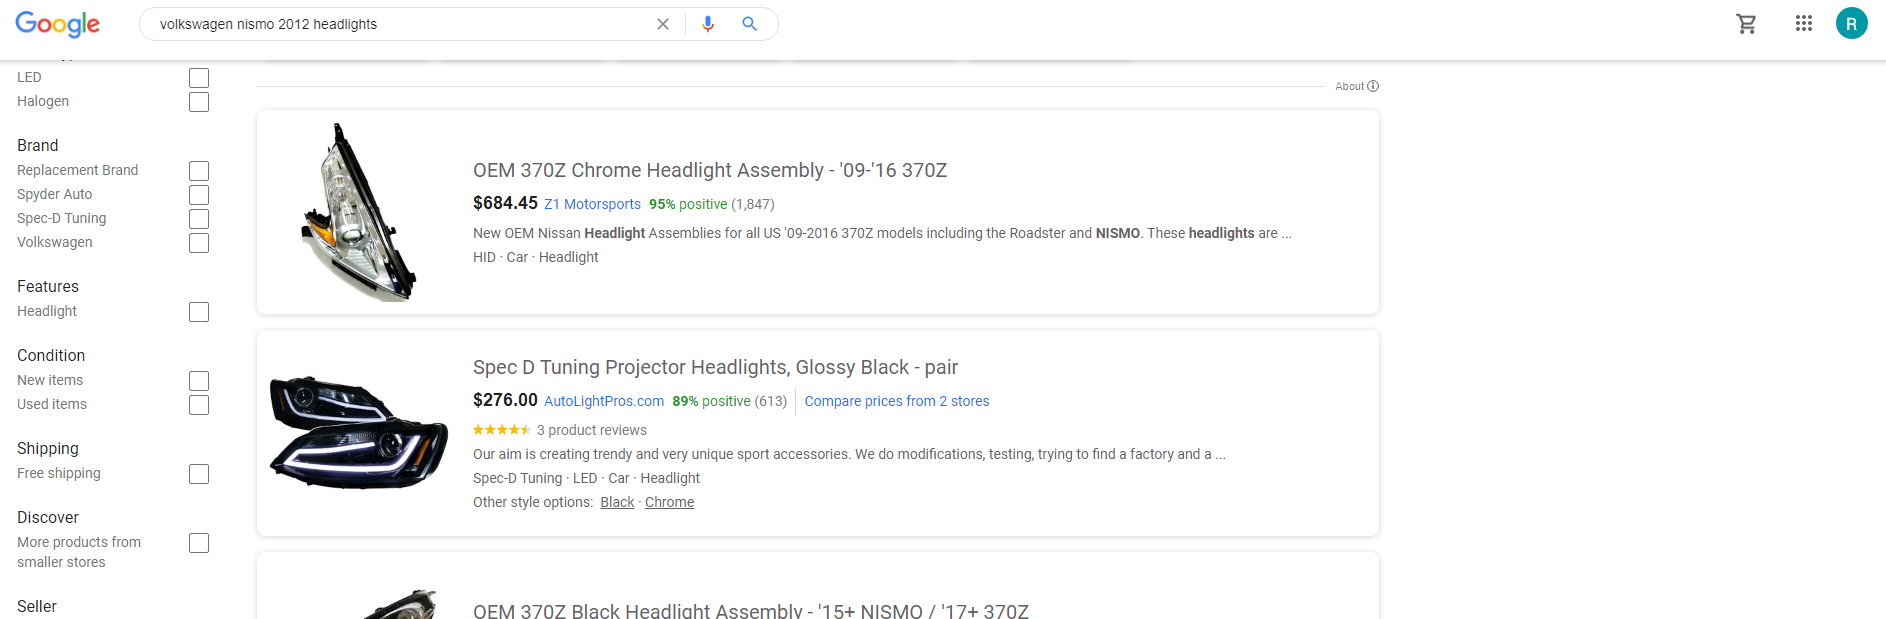 Google Shopping results for auto-parts